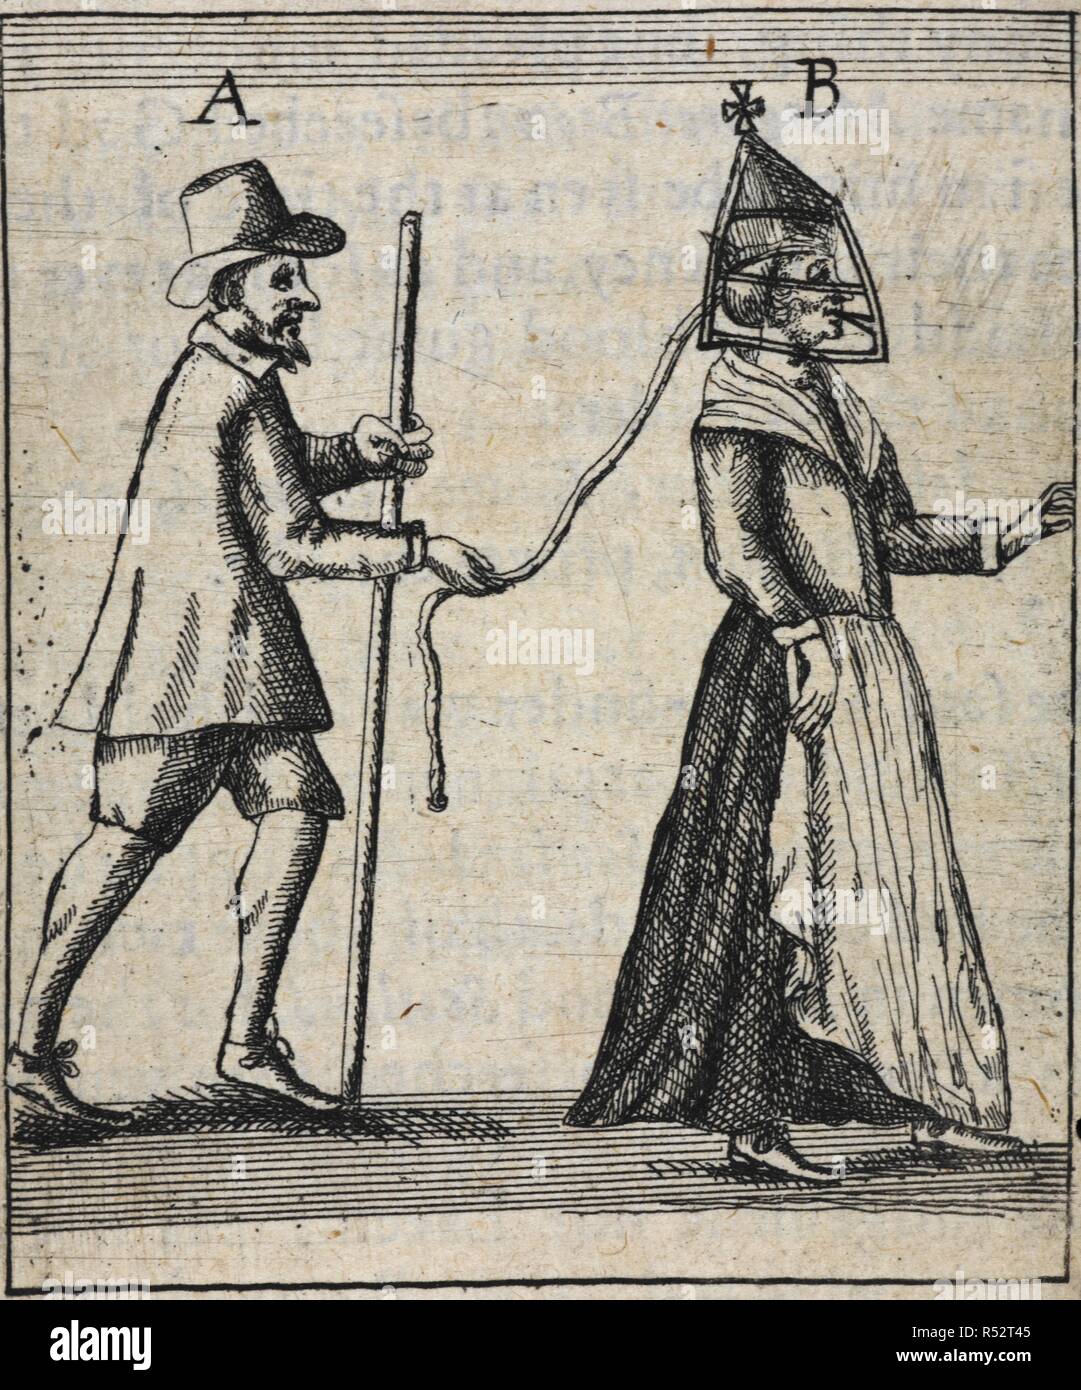 A woman wearing a faceguard. A mean holding a lead attached to the faceguard. Englands grievance discovered in relation to the coal-trade. With the map of the River of Tine and situation of the town and corporation of Newcastle. London : For R. Ibbitson and P. Stent, 1655. Source: 1029.b.4. Language: English. Author: GARDINER, RALPH. Stock Photo